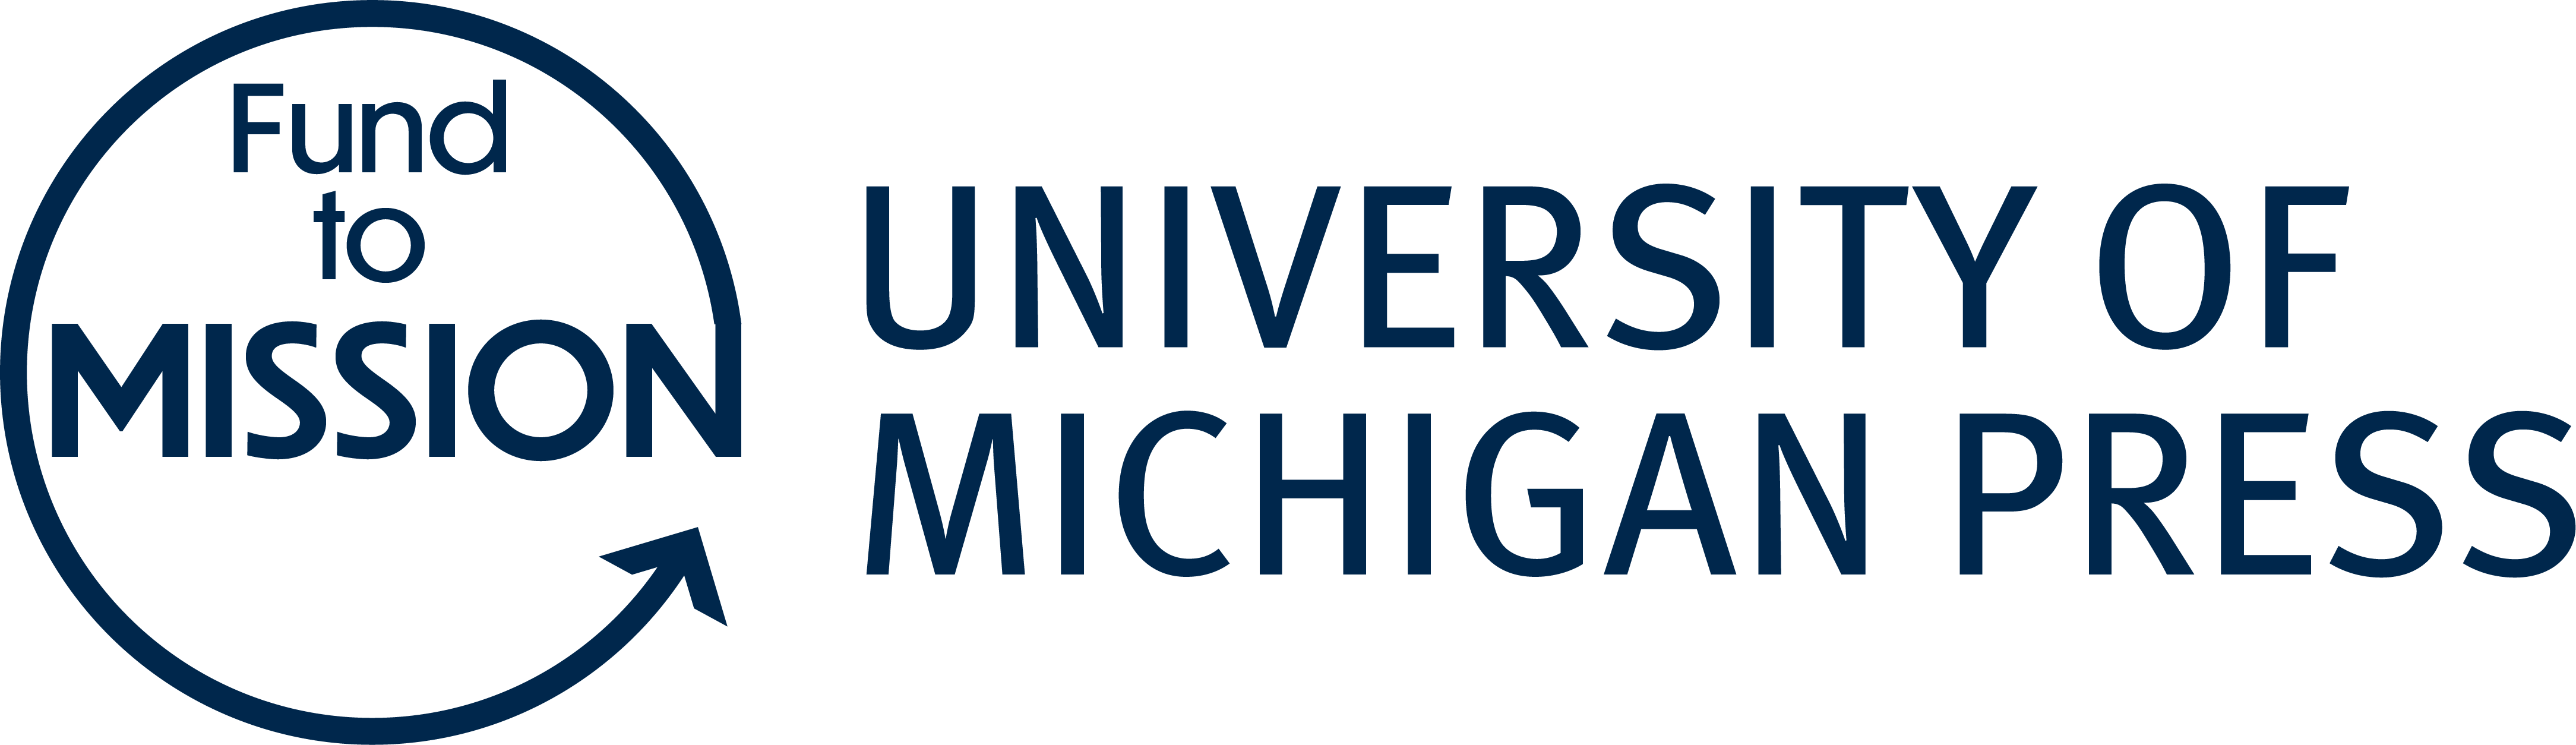 Navy blue background with University of Michigan Press logo in upper lefthand corner and orange open lock open access logo in upper righthand corner. Main title reads "Fund to Mission: University of Michigan Press' Open Access Model" in white serif font. 